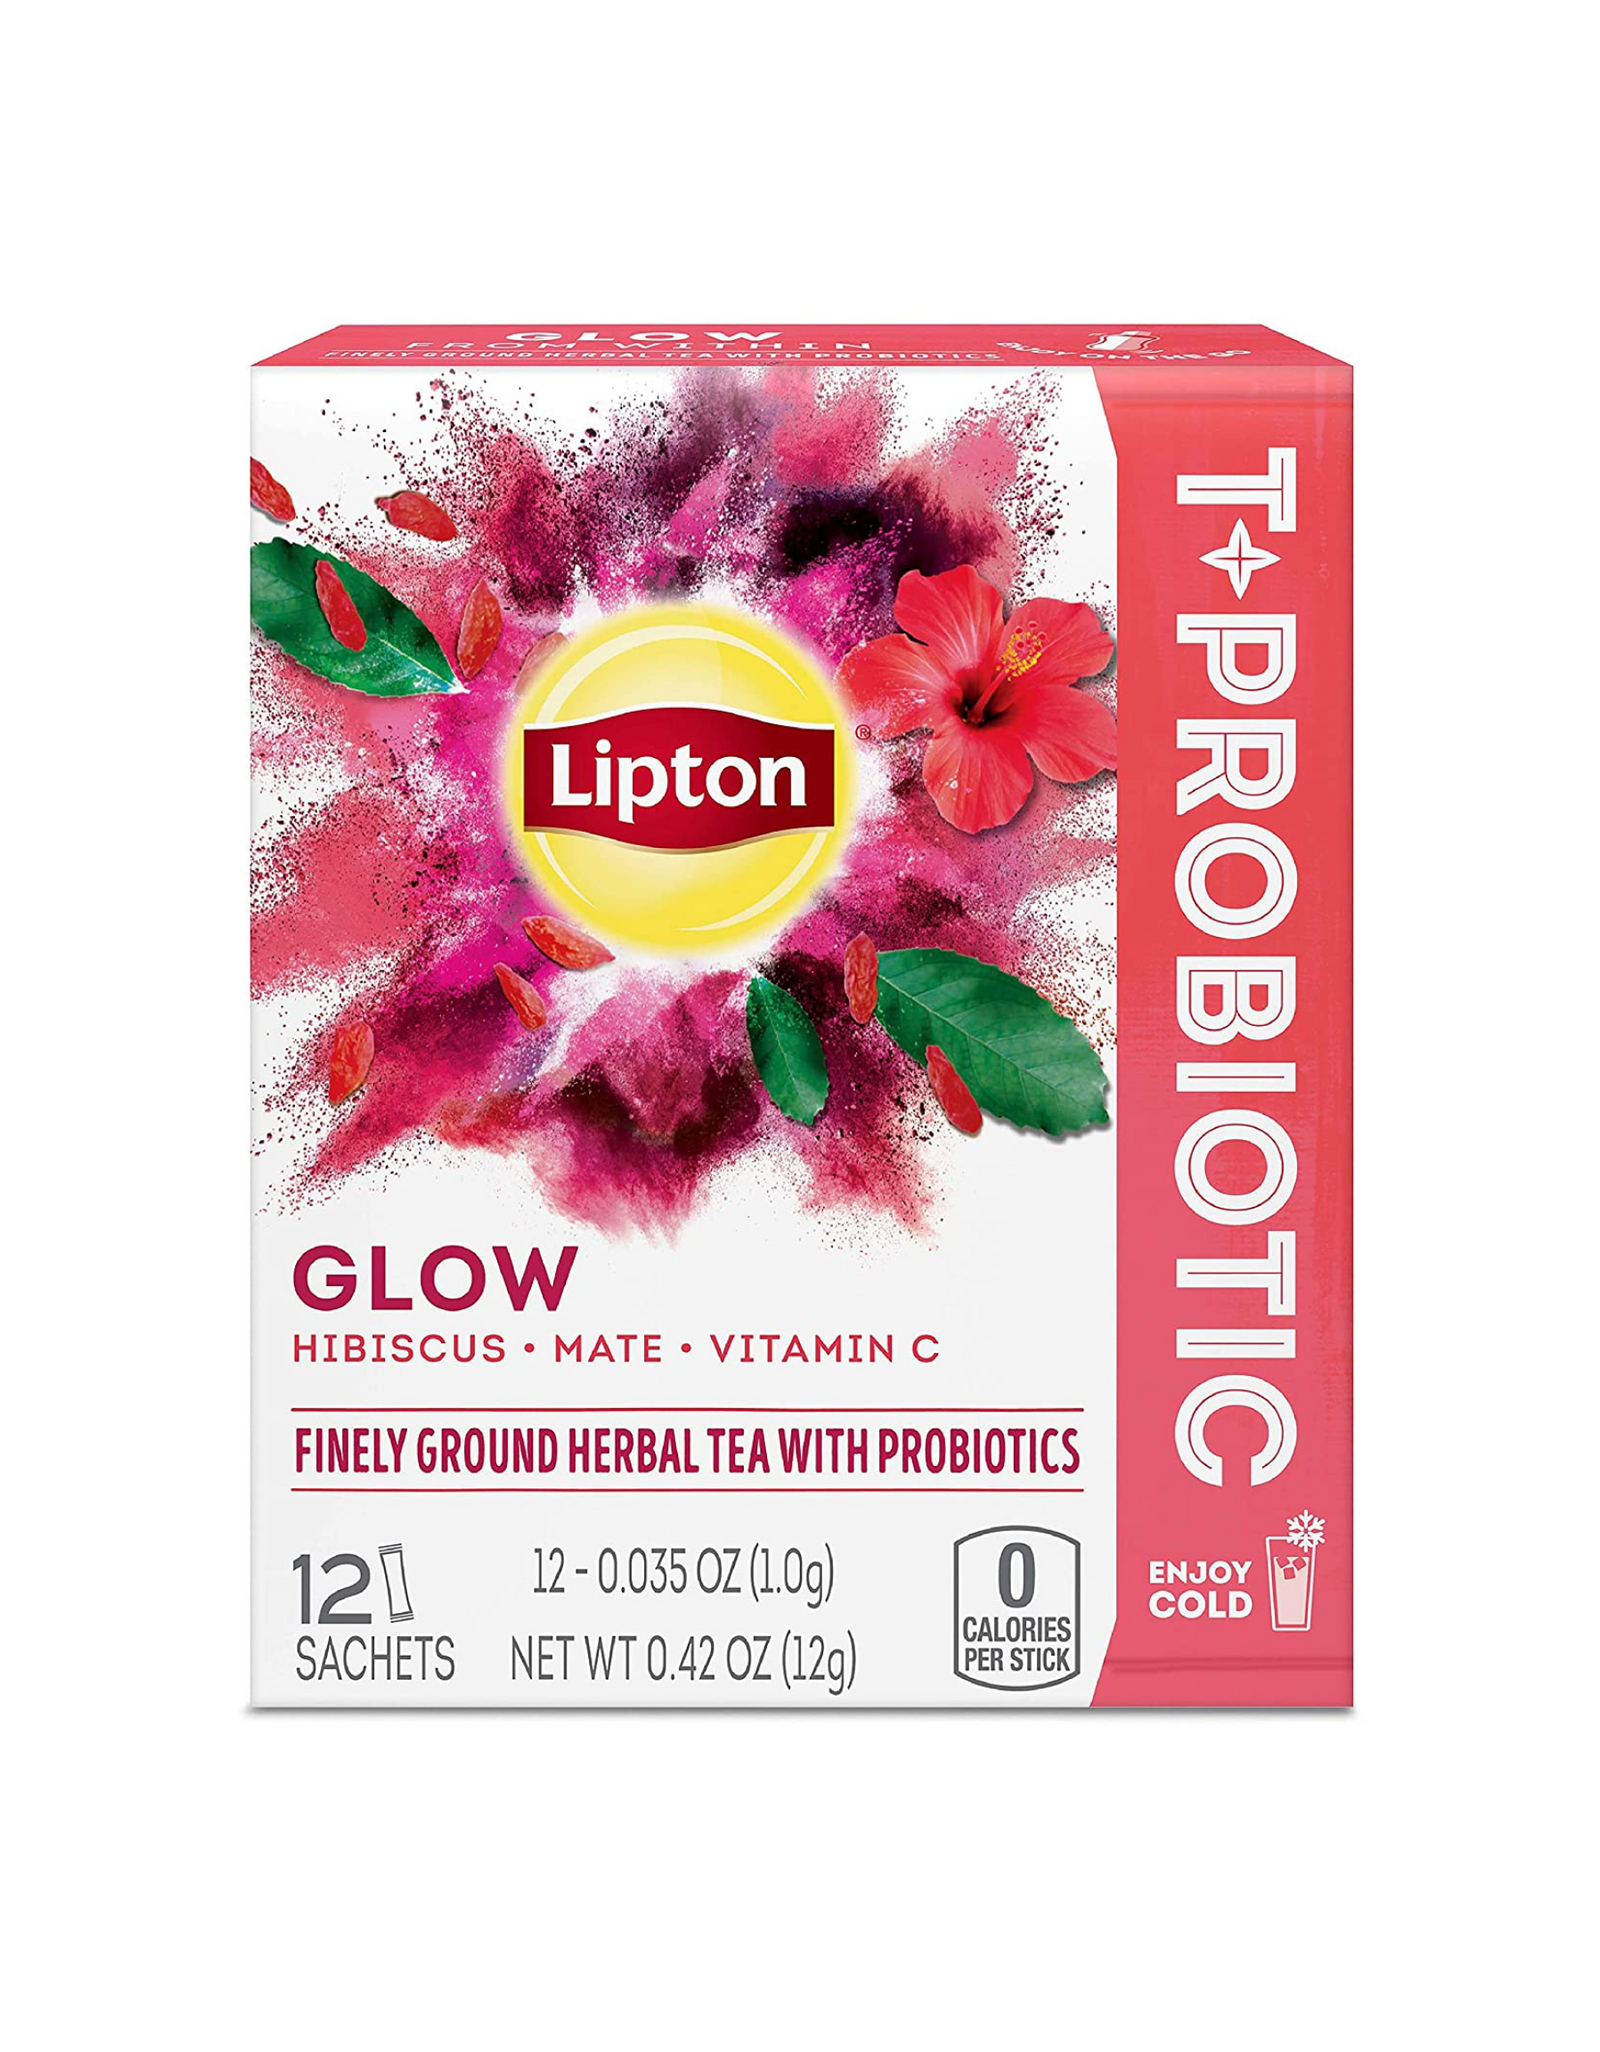 Lipton Tea Sachets For A Refreshing Drink T+Probiotic, Glow Tea Powdered with Hibiscus Mate + Vitamin C, 0.42 oz, 12 Ct